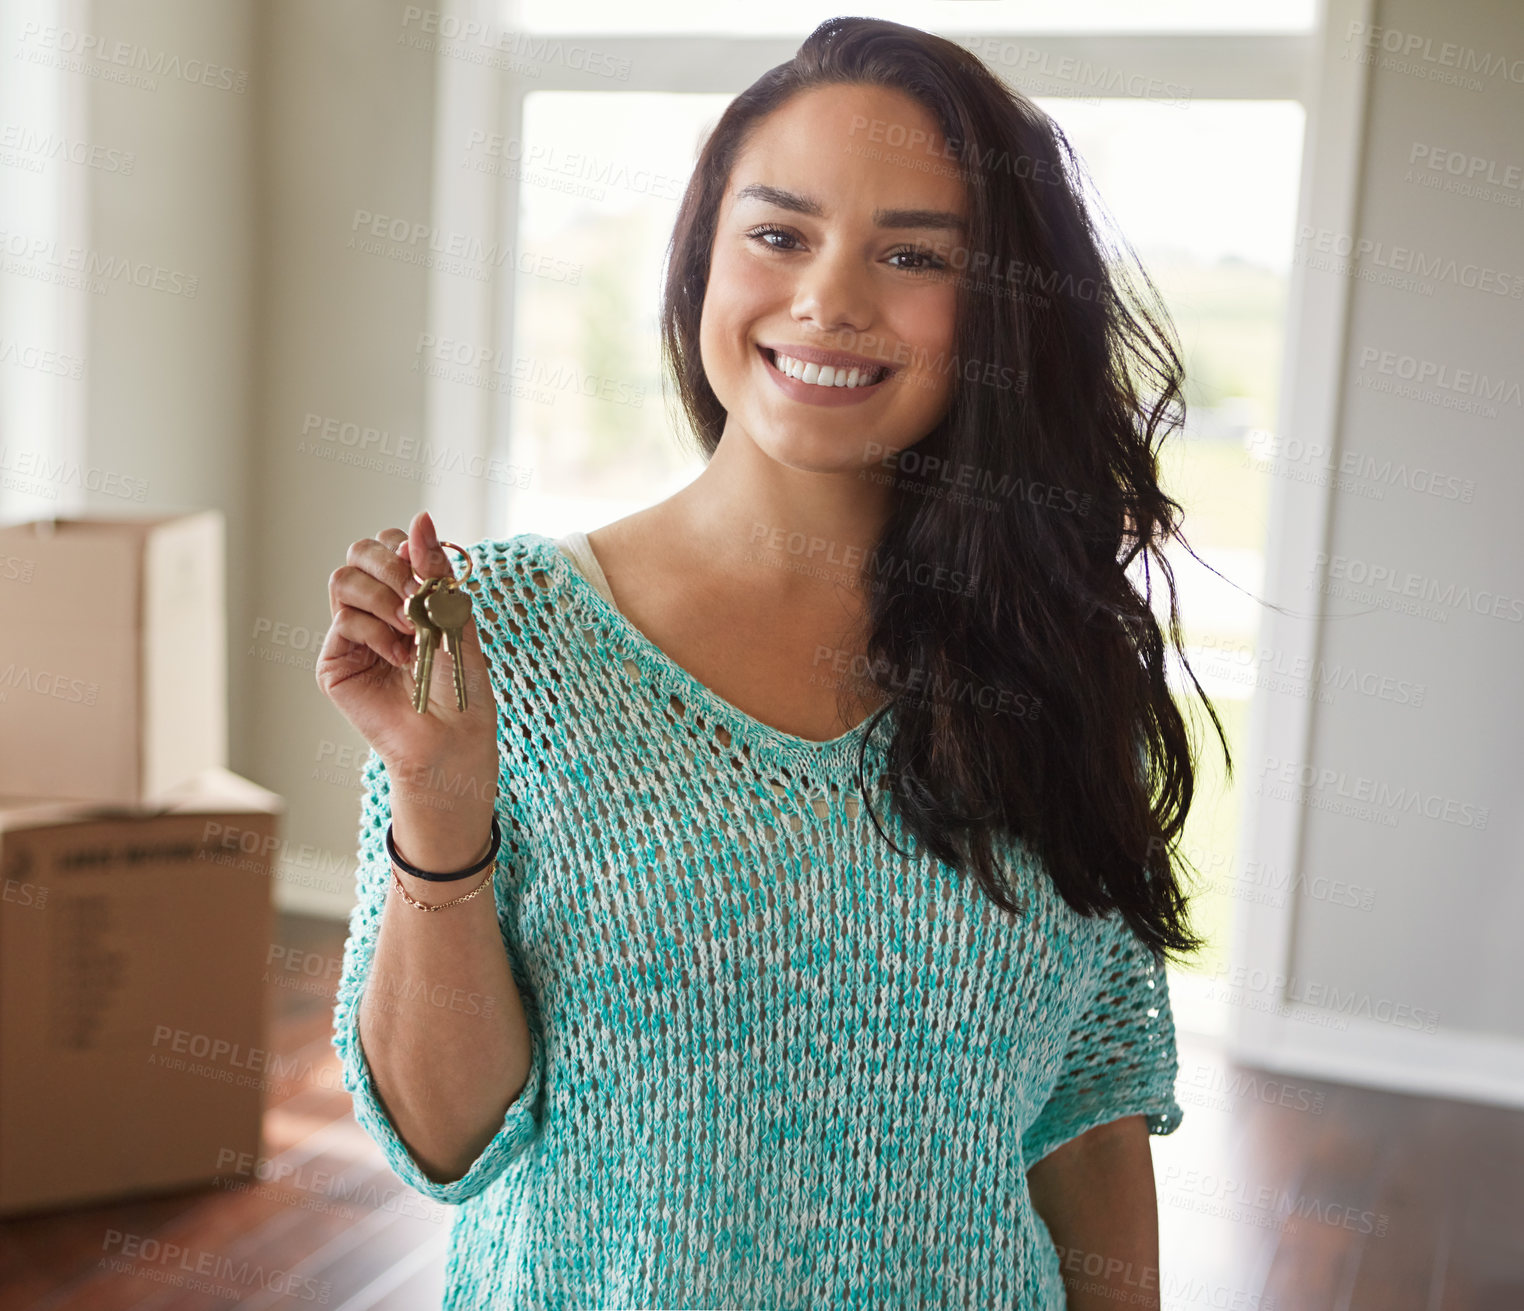 Buy stock photo Shot of a woman moving into her new home